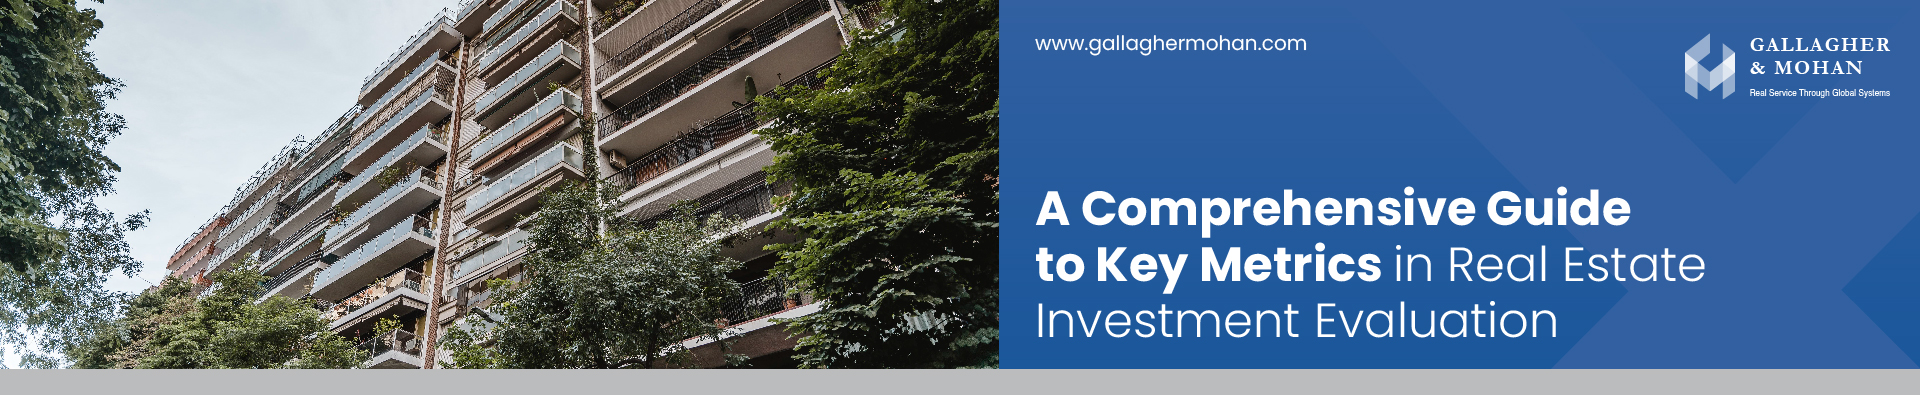 A Comprehensive Guide To Key Metrics In Real Estate Investment Evaluation